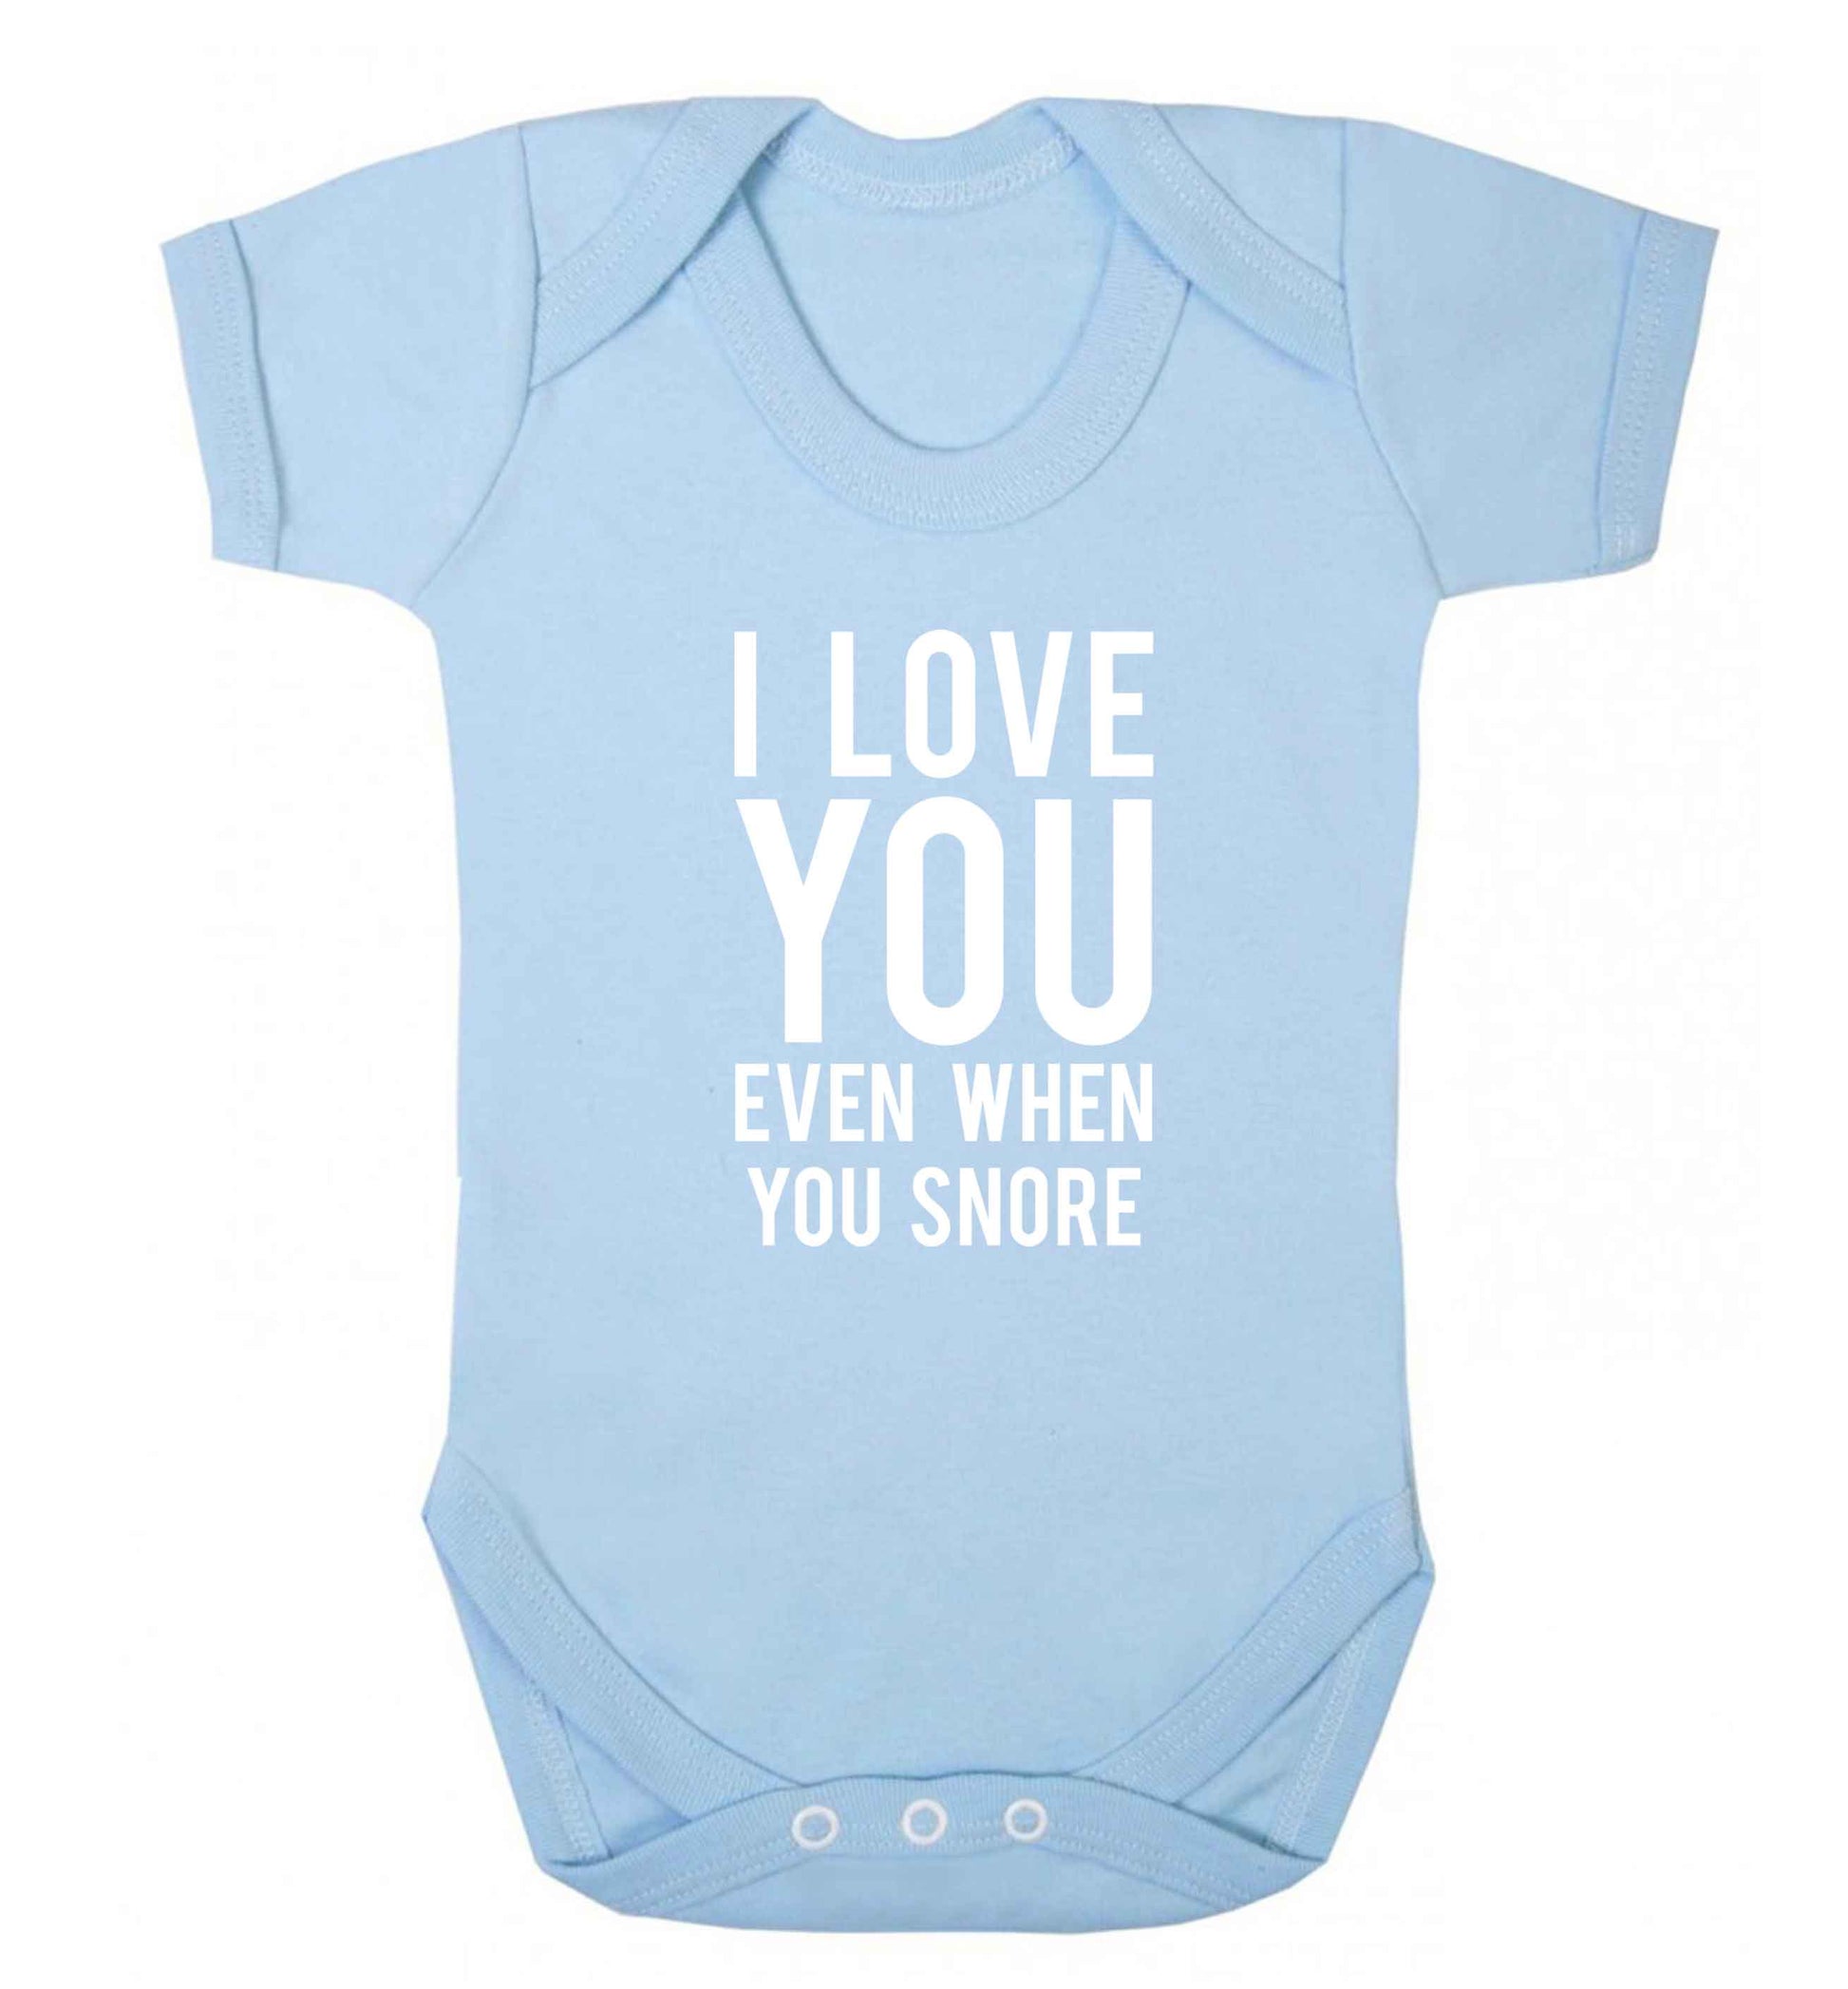 I love you even when you snore baby vest pale blue 18-24 months